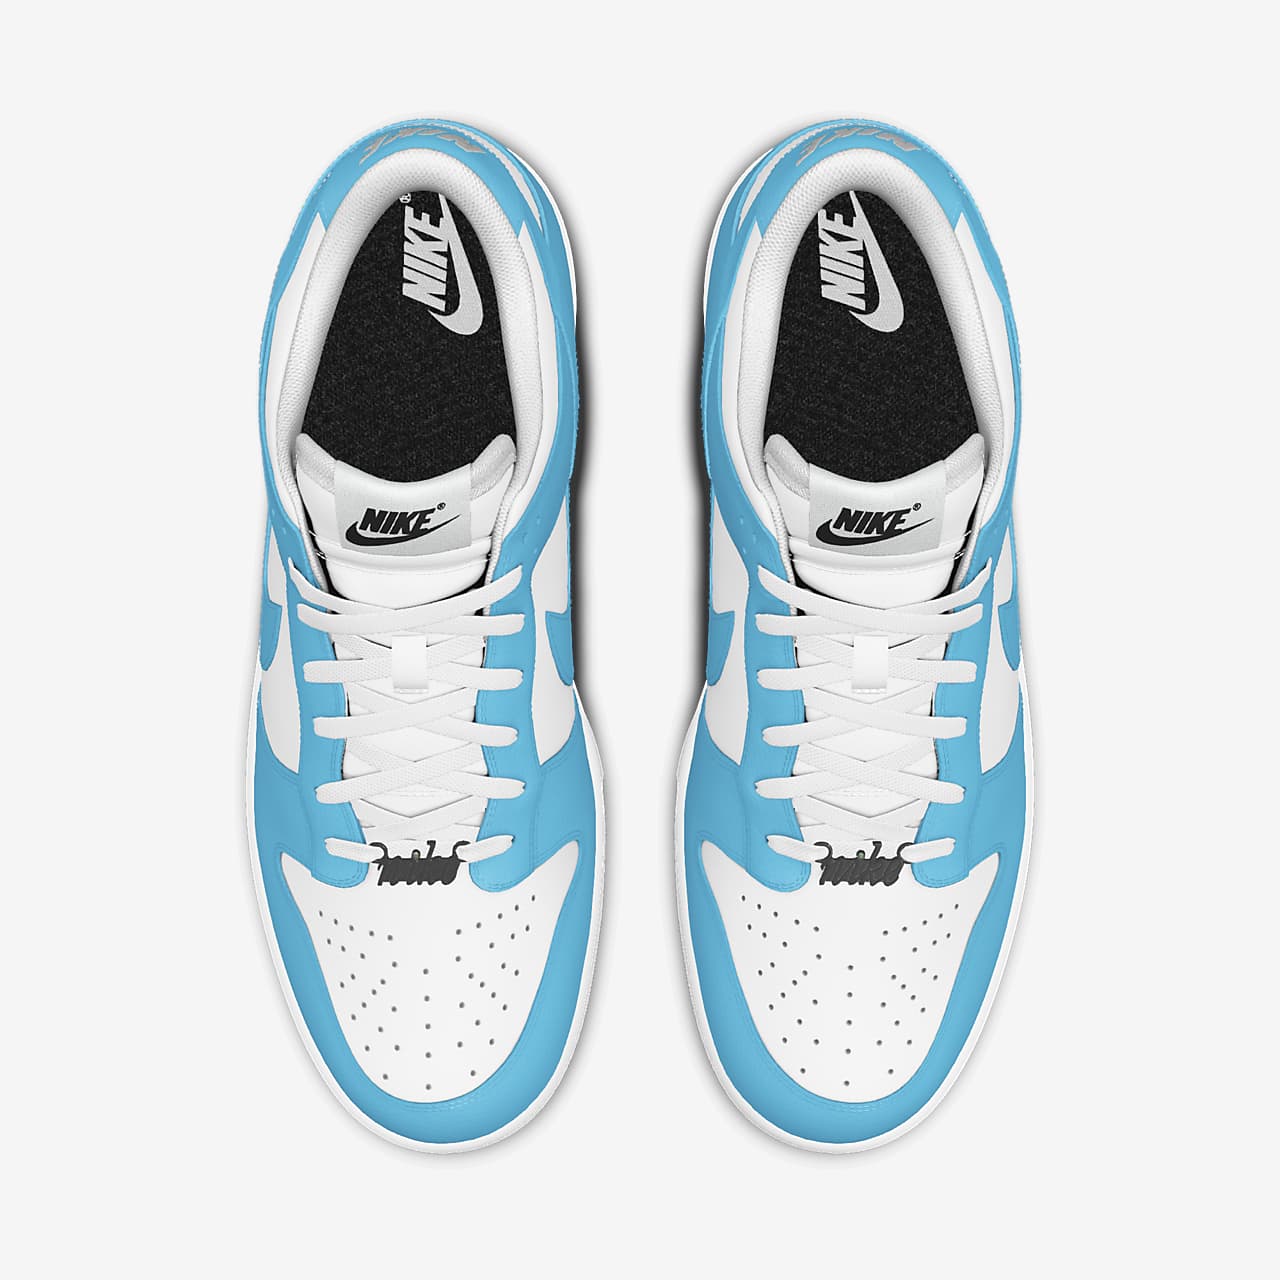 NIKE DUNK LOW by you unlocked UNC ナイキダンク - スニーカー